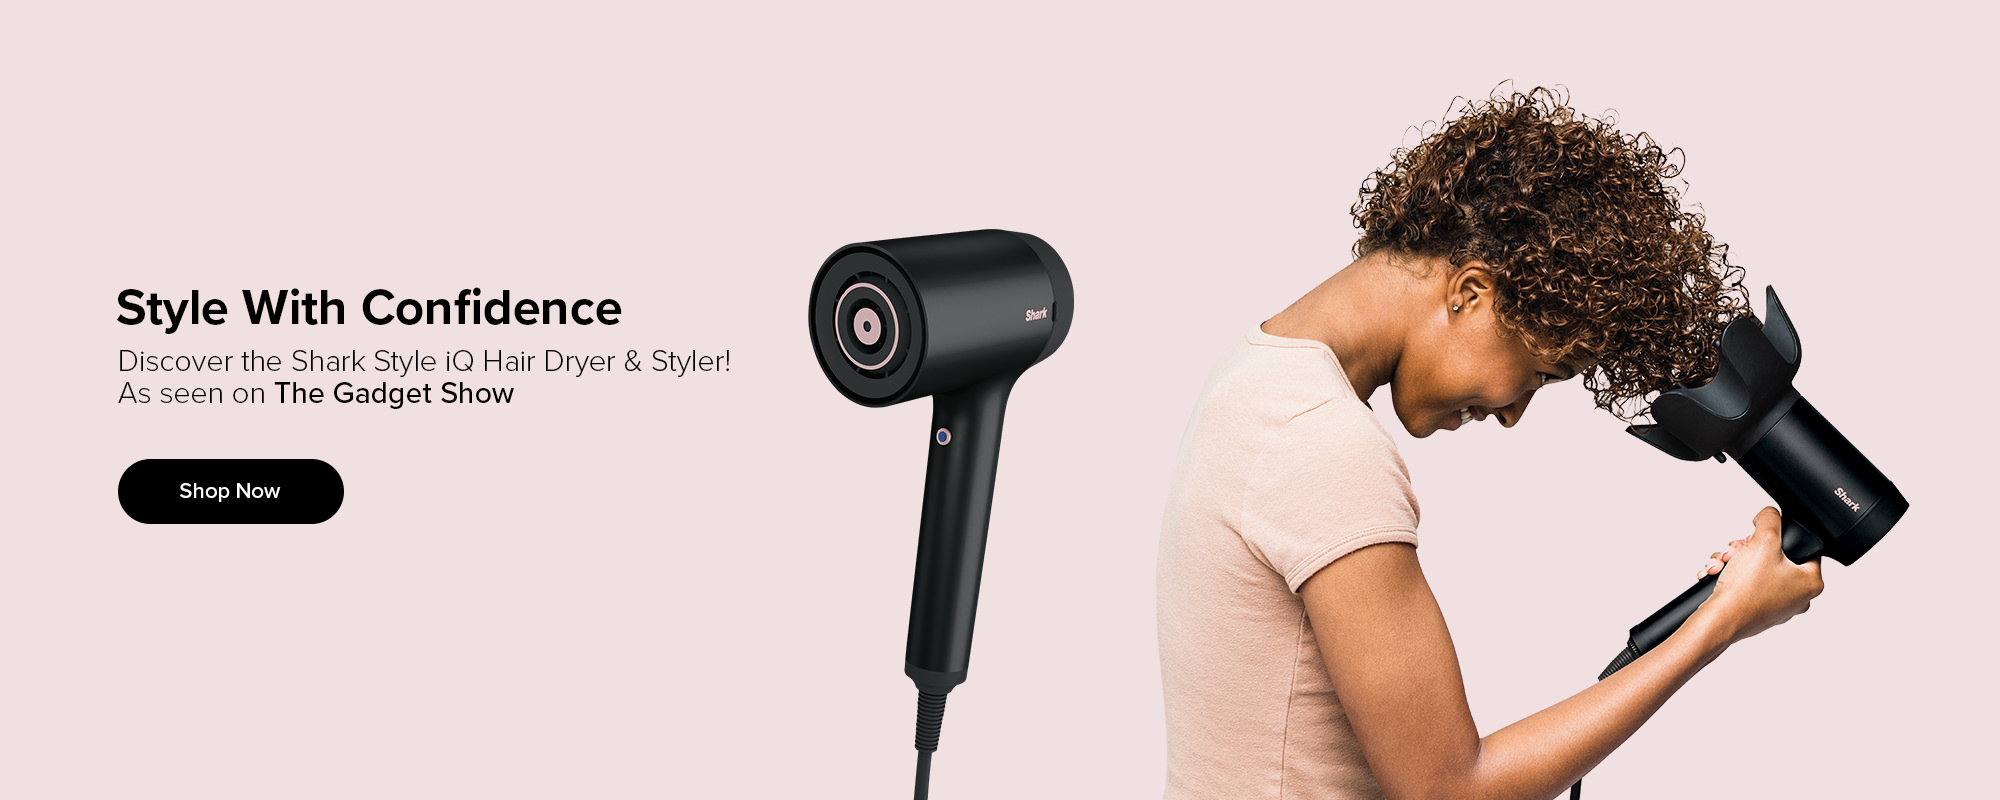 Style your hair with confidence using the Shark Style IQ Hair Dryer